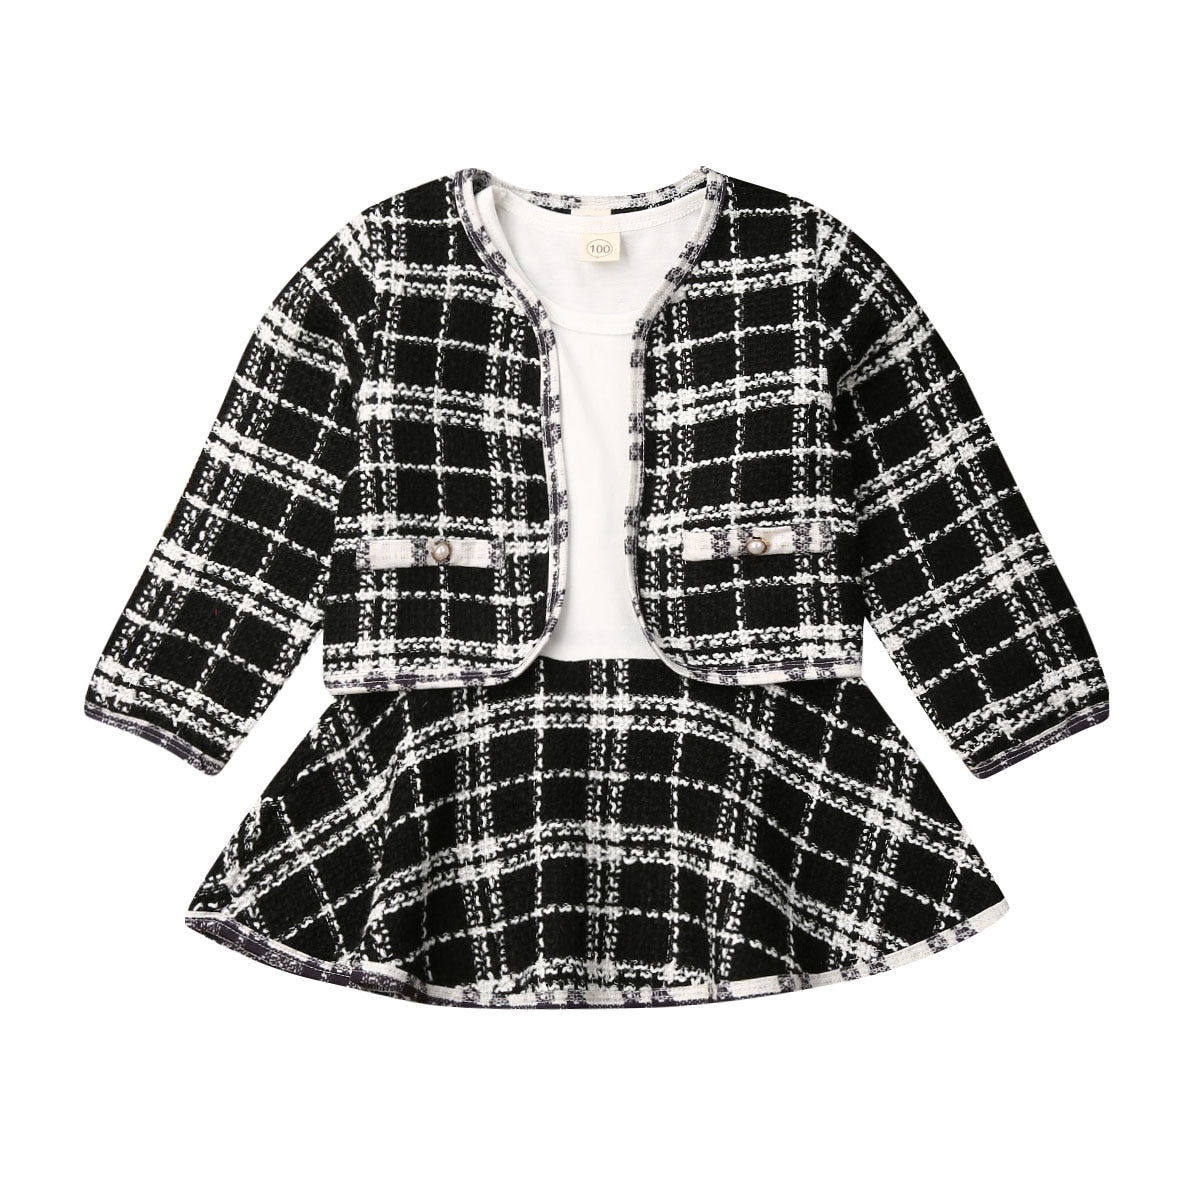 2Pcs Autumn Winter Party Kids Clothes For Baby Girl Fashion Pageant Plaid Coat Tutu Dress Outfits Suit Toddler Girl Clothing Set - TRIPLE AAA Fashion Collection